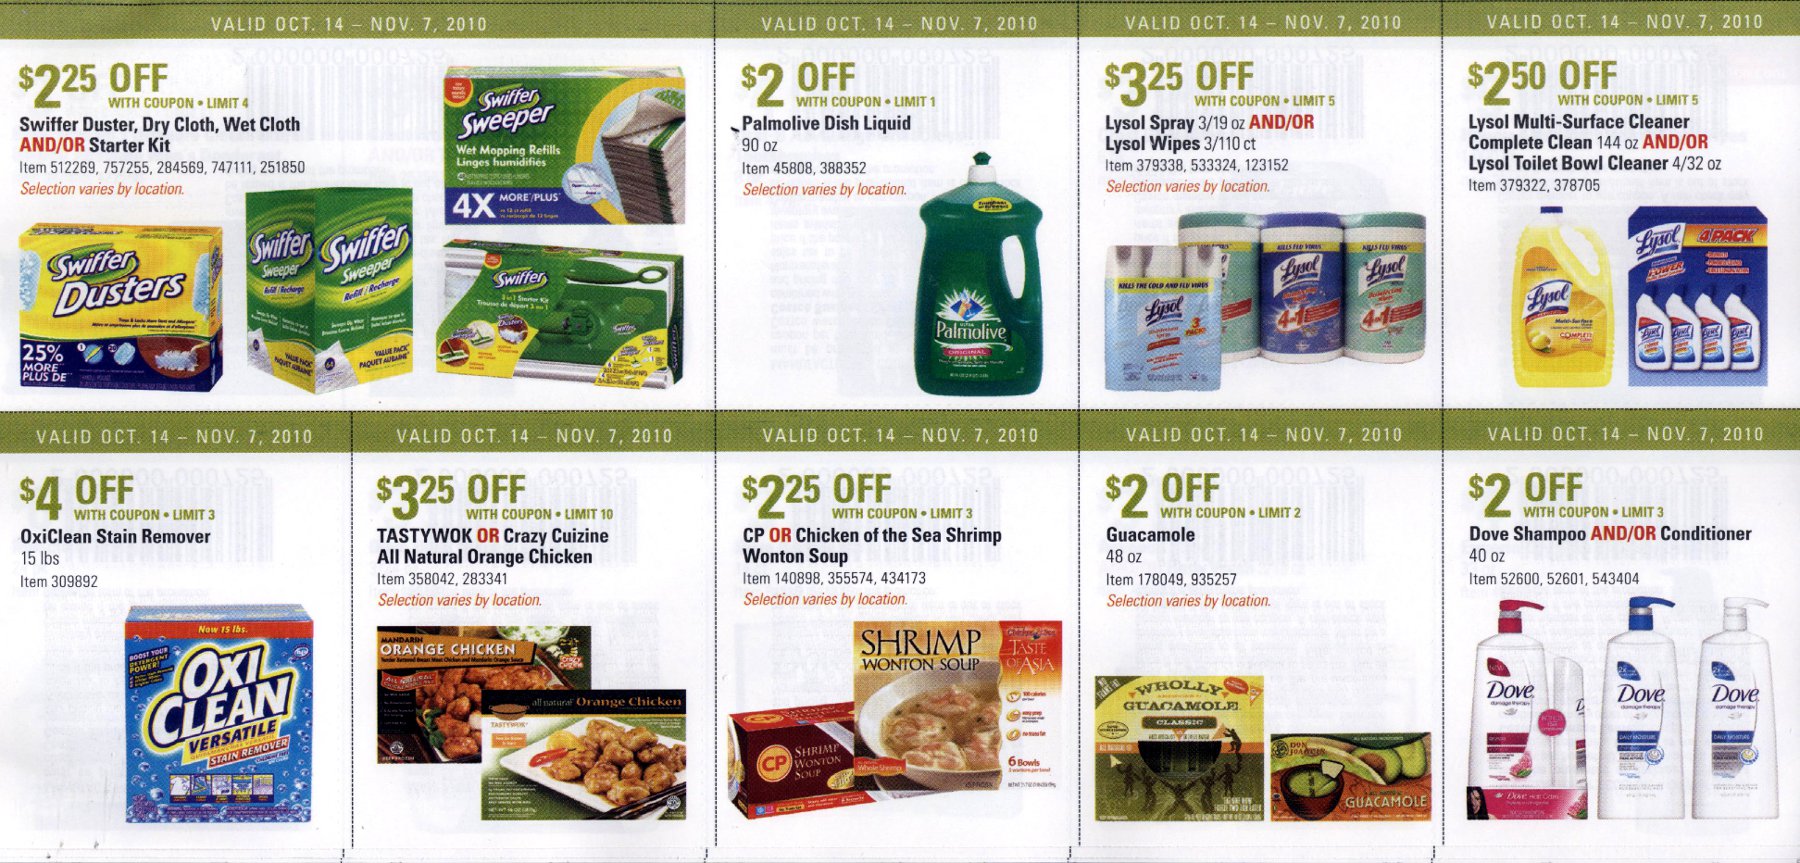 Coupon book full size page -> 4 <-